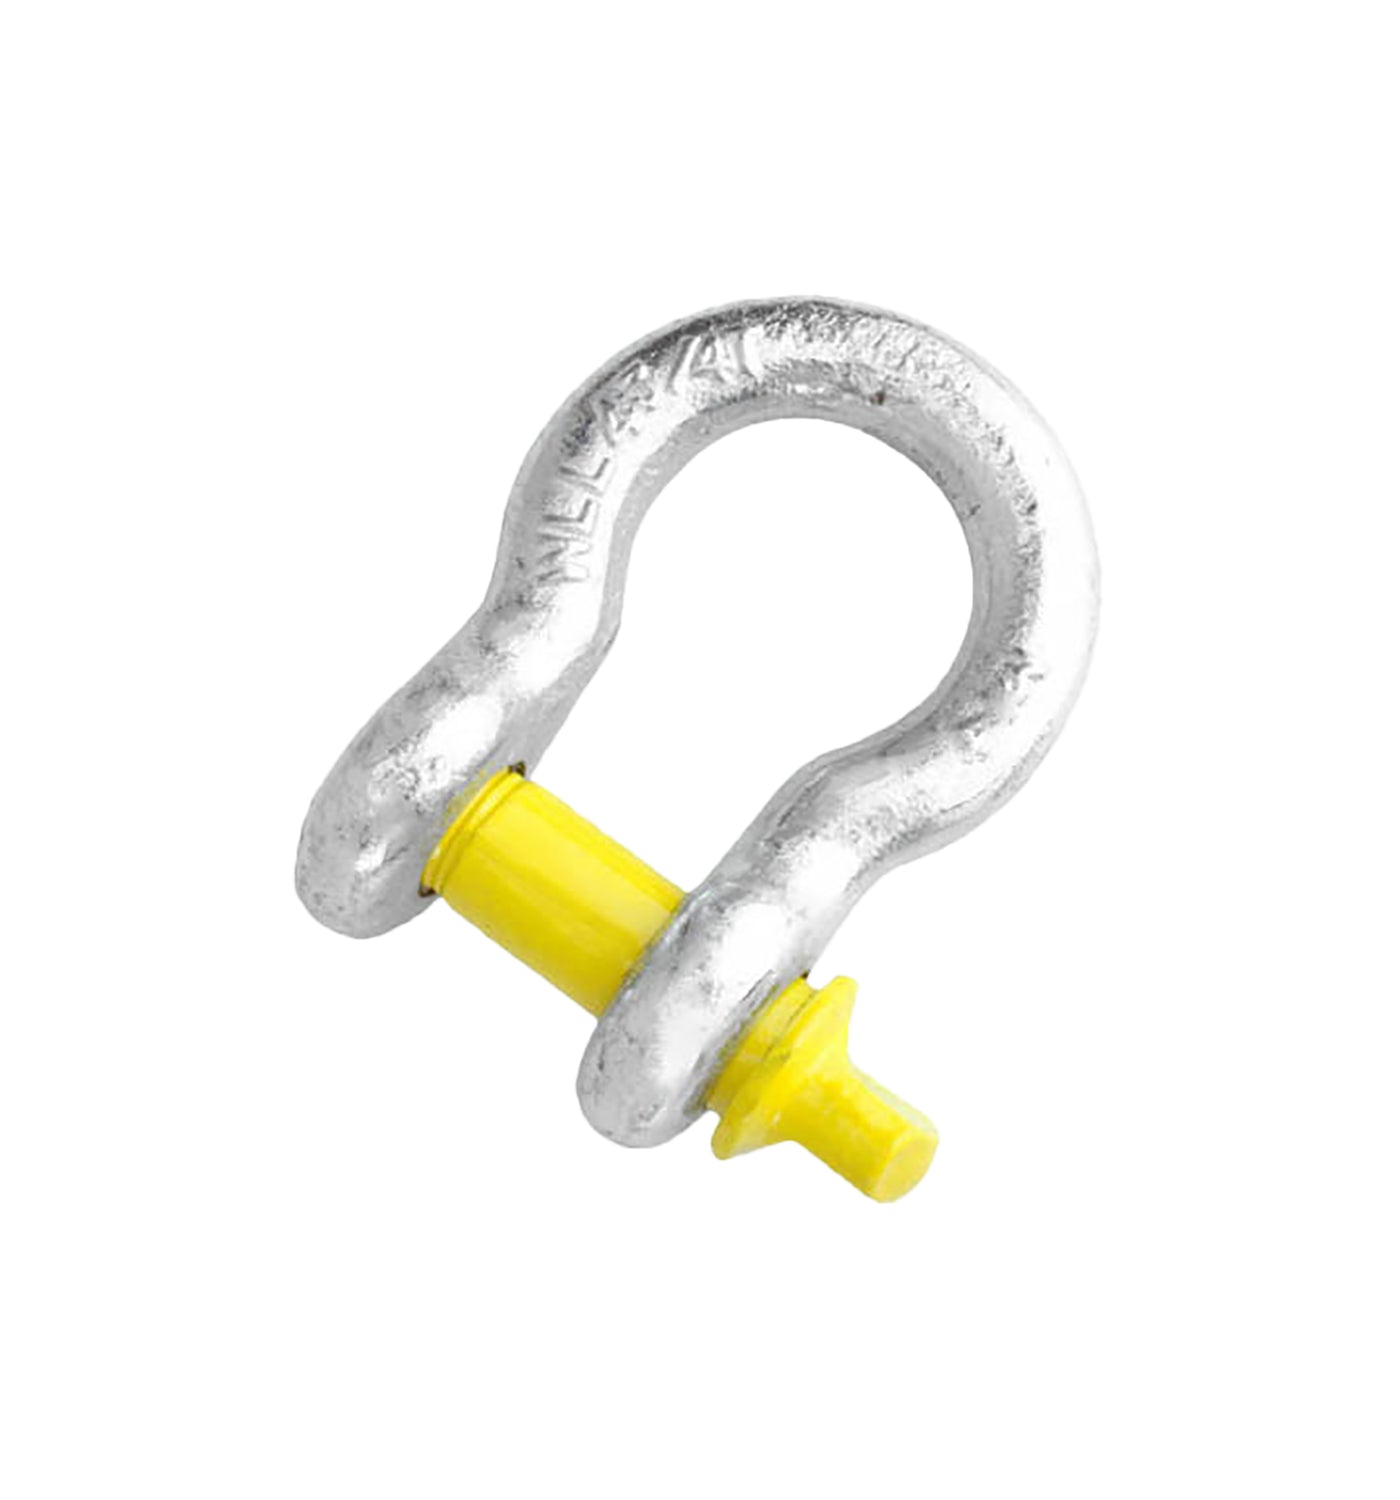 2 X 19mm Bow Shackle 4.75 Ton 4Wd 4X4 Recovery Rated Ton Rescue Trailer Parts